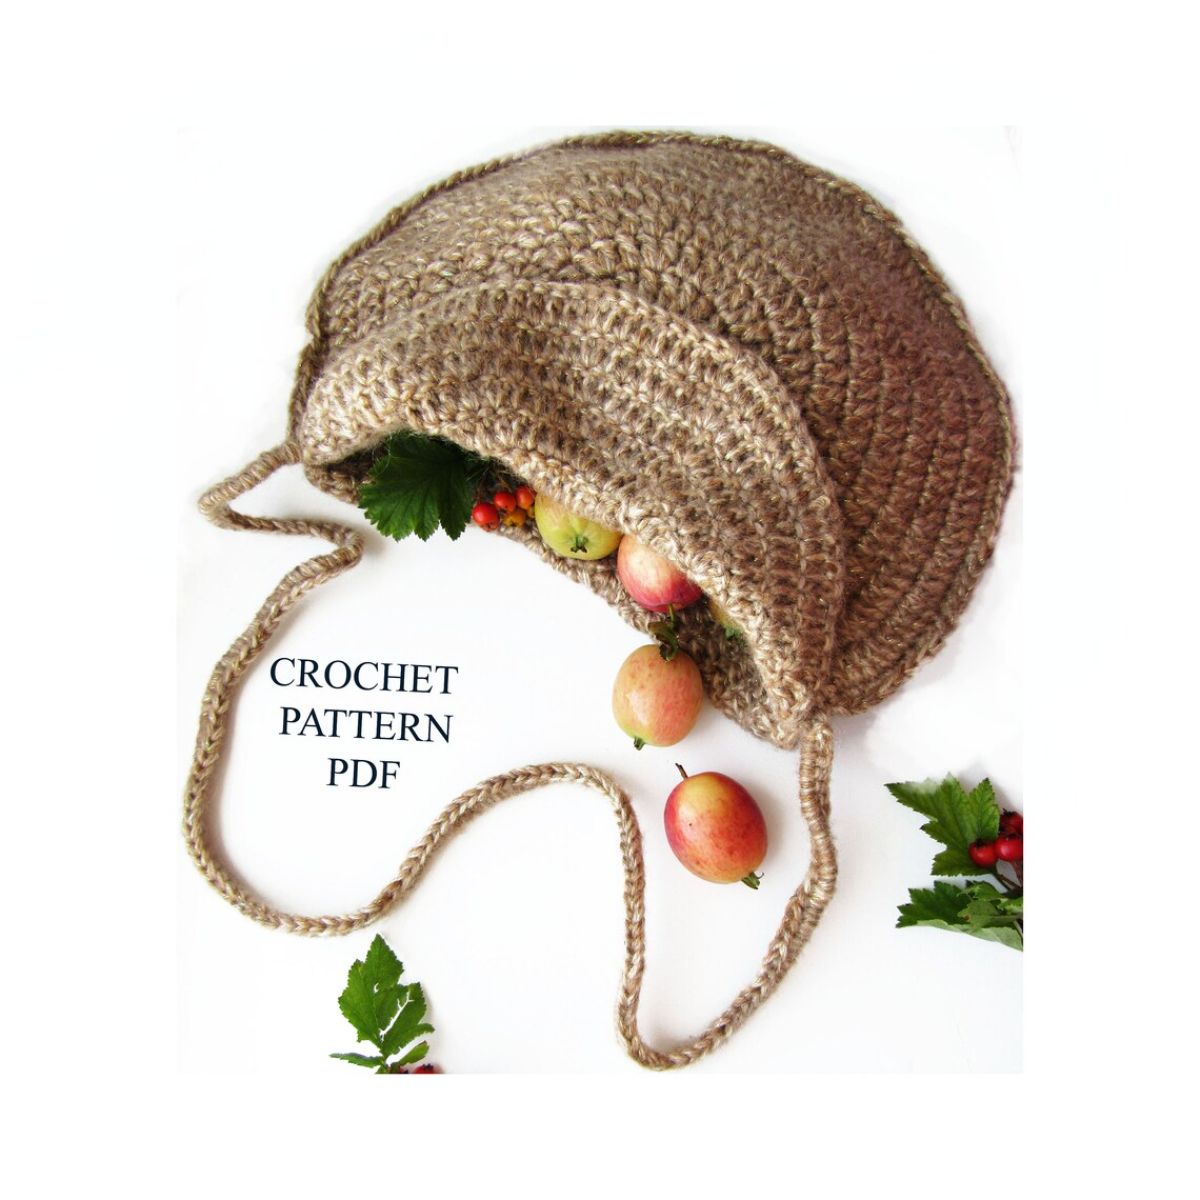 Brown crochet round bag with long handles and flap to open, filled with fruit on a white background with some leaves. 